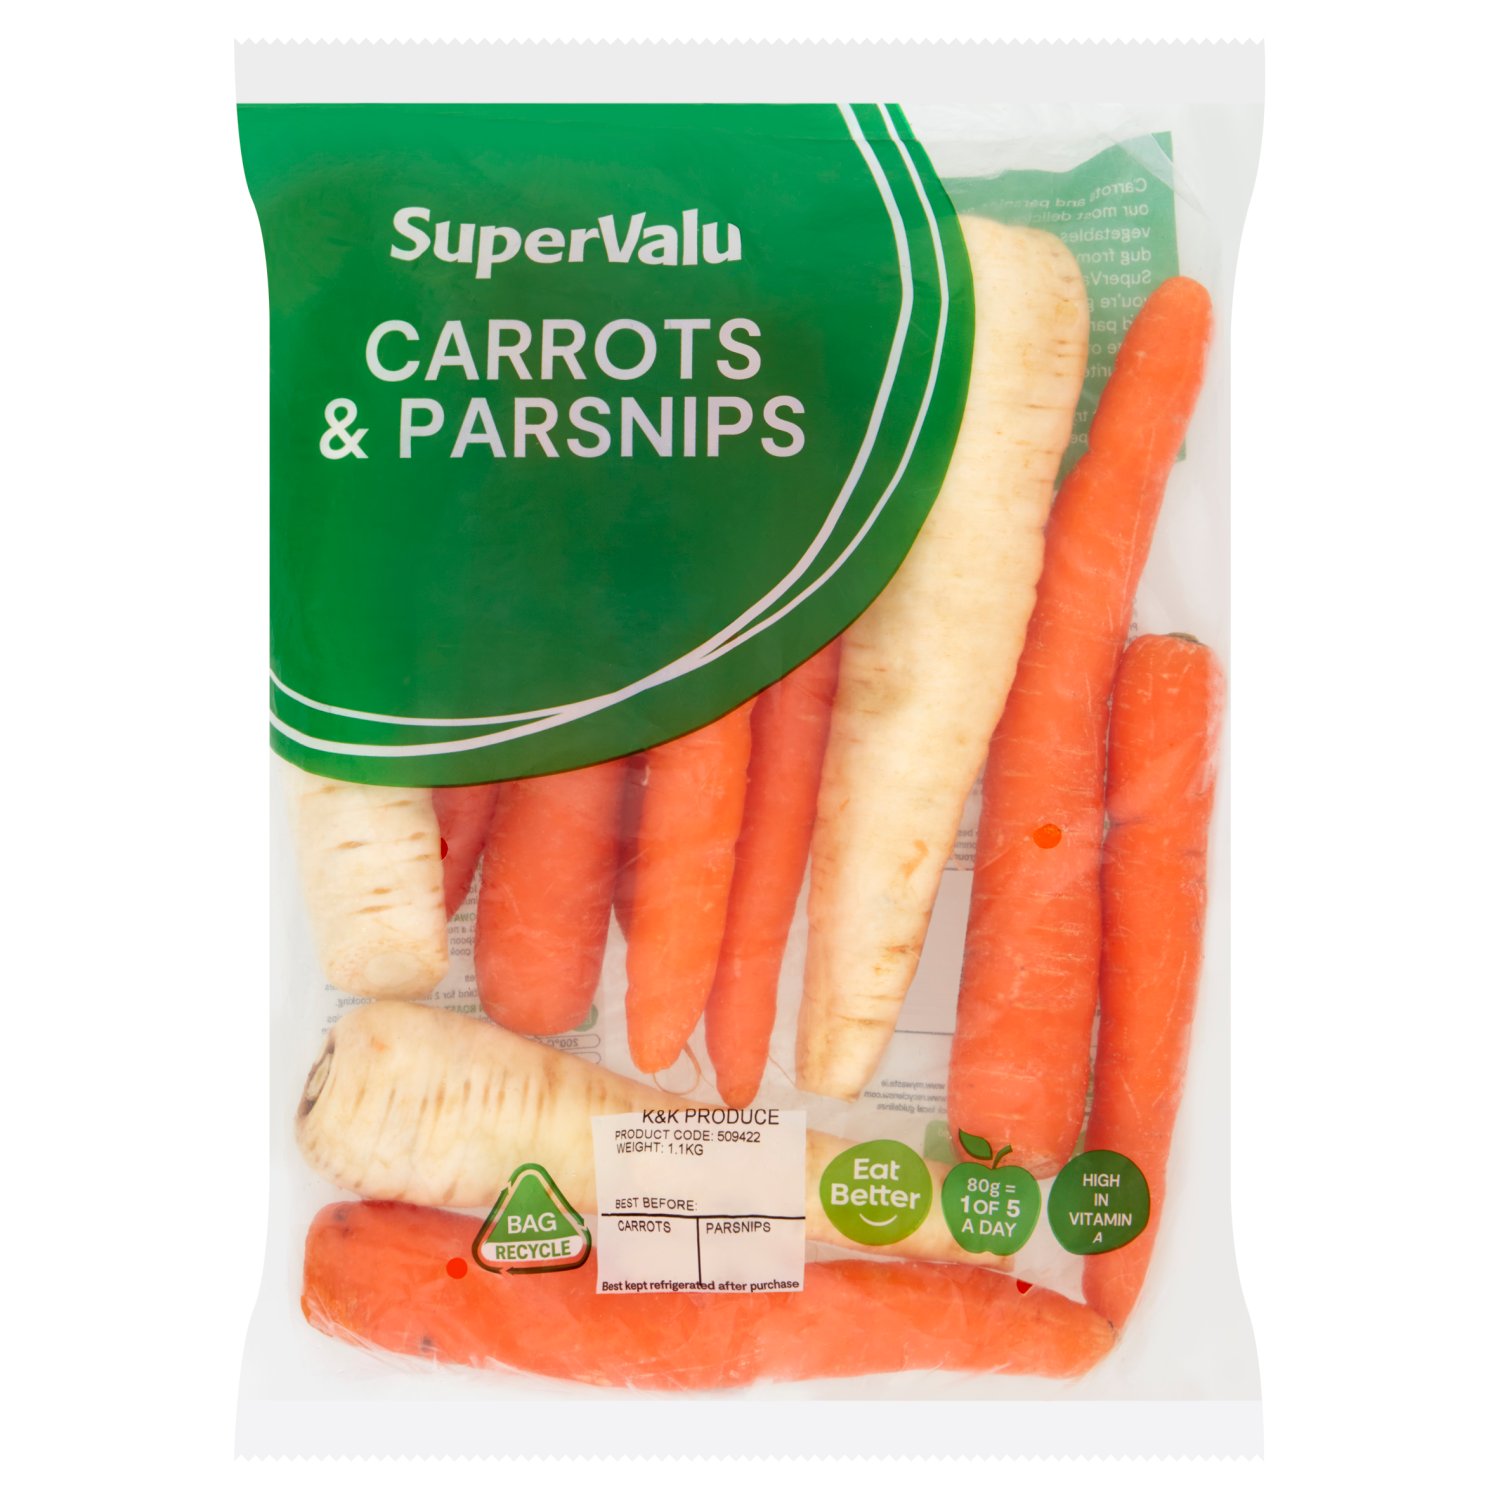 Carrots and parsnips are two of our most delicious and healthiest vegetables. And when they're dug from the ground and put on Supervalu's shelves, you know you're getting the freshest carrots and parsnip around. Perfect in a range of meals from stews to your favourite casserole or soups.

Vitamin A contributes to the maintenance of normal vision when consumed as part of a balanced diet and healthy lifestyle.

5 A Day
It is recommended that we eat at least 5 portions of fruit and vegetables everyday to maintain a healthy lifestyle. 80g equals one portion.